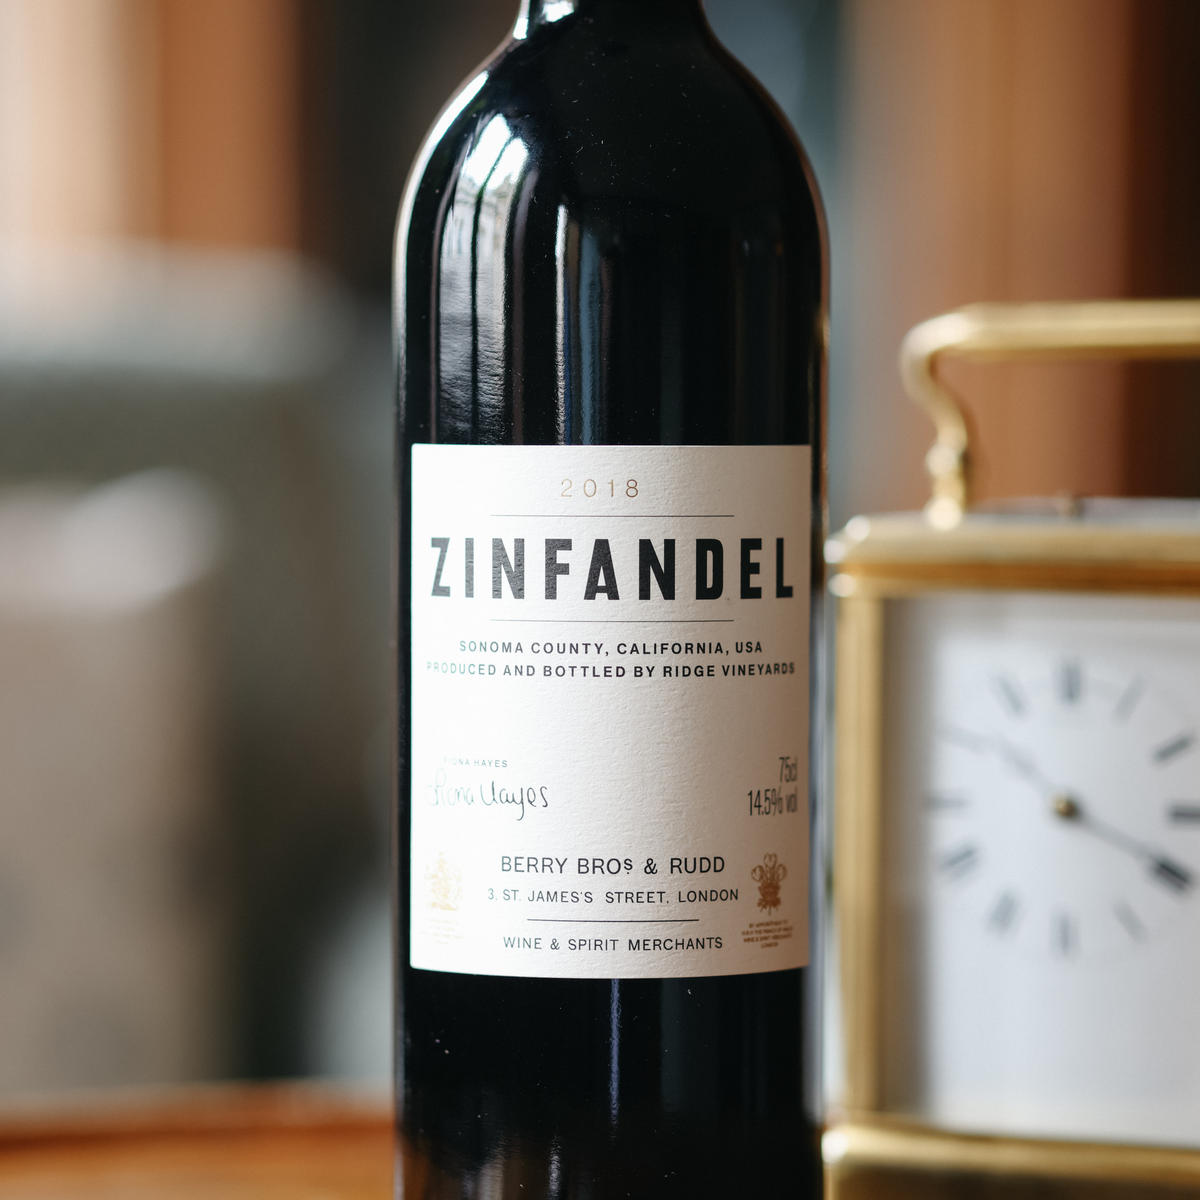 A photograph of our 2018 Own Selection Zinfandel standing on top of a table, with an old fashioned clock in the background